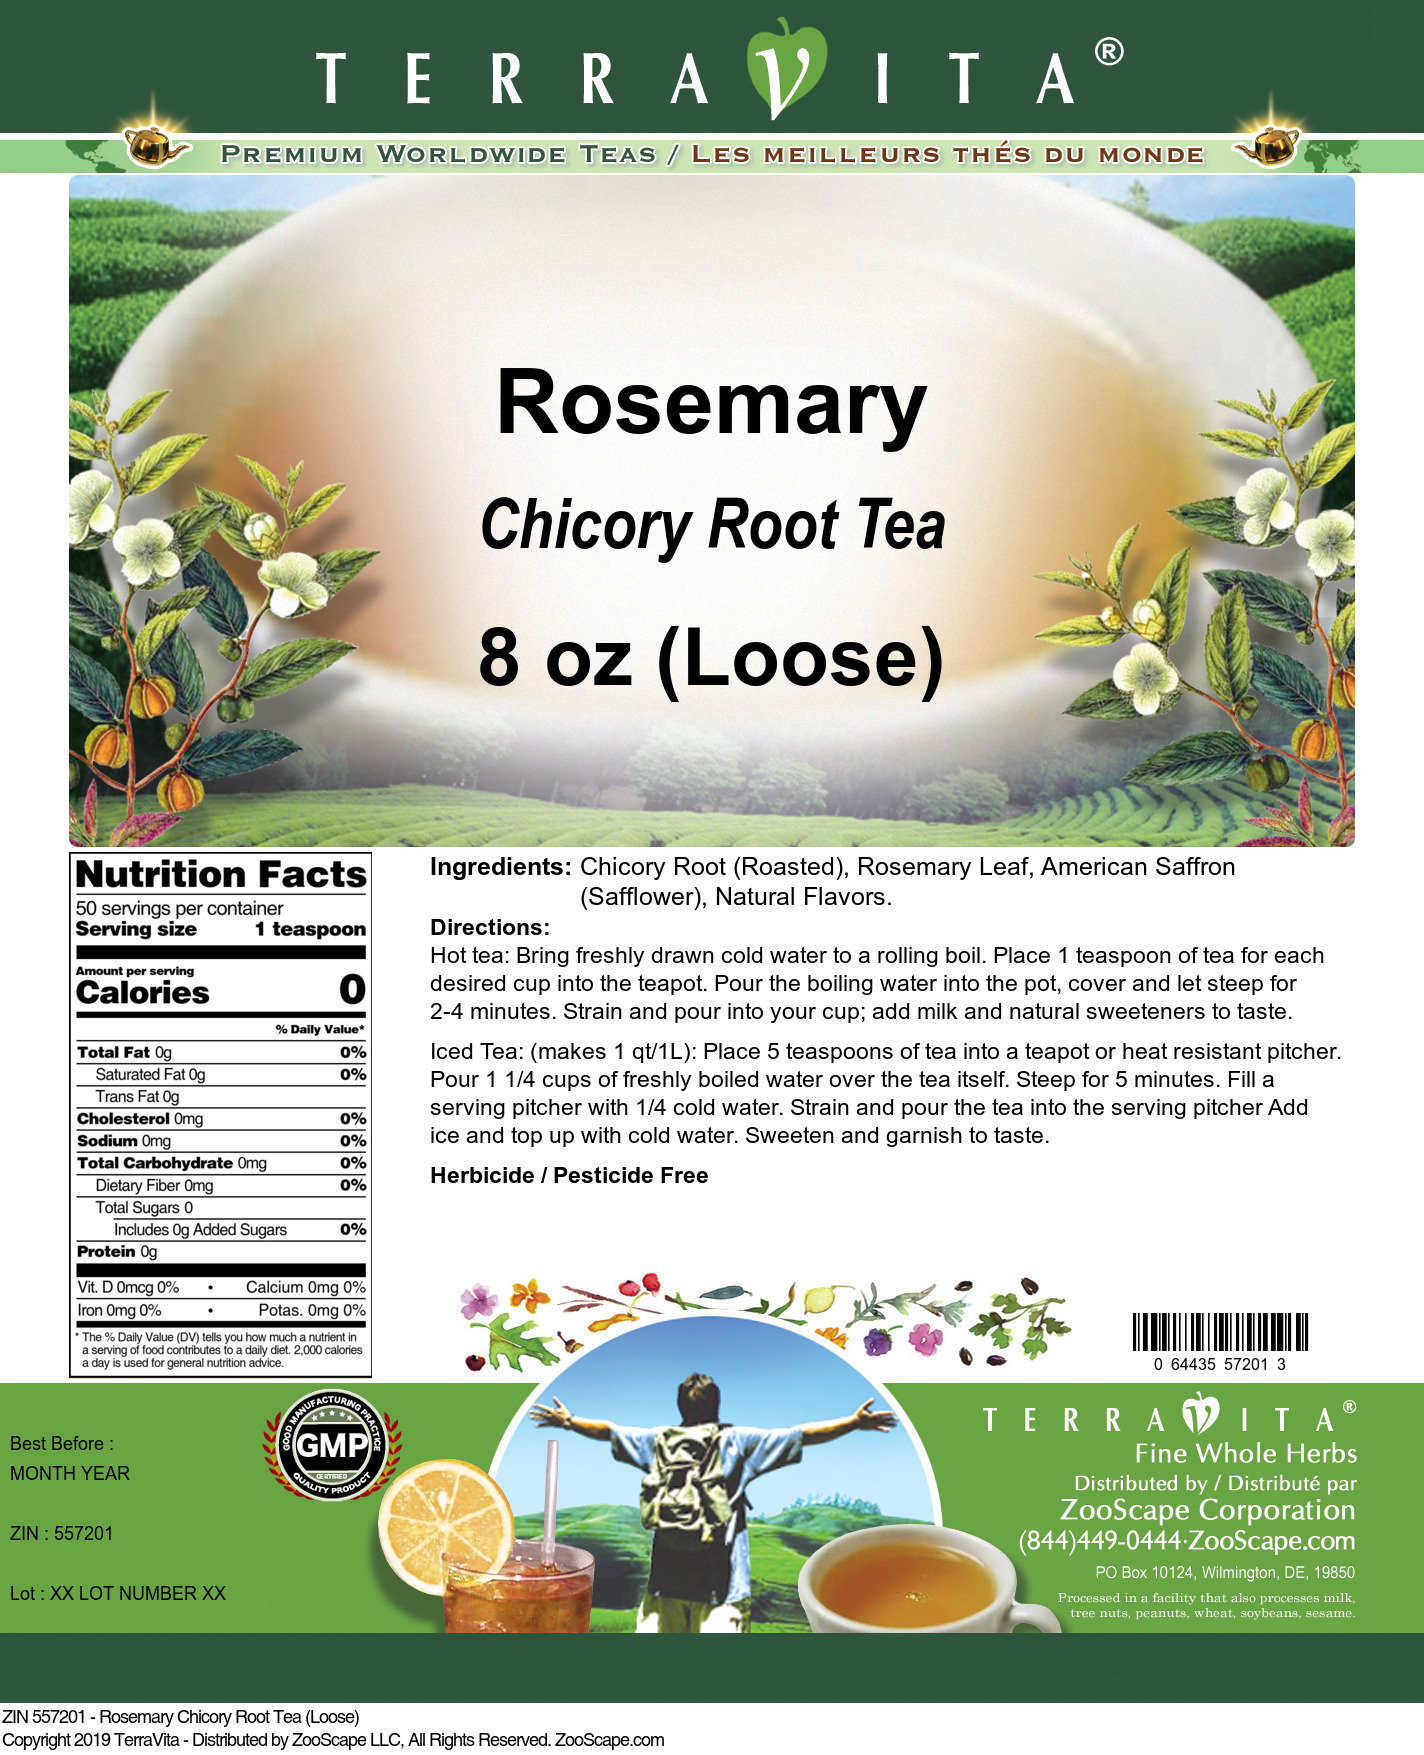 Rosemary Chicory Root Tea (Loose) - Label